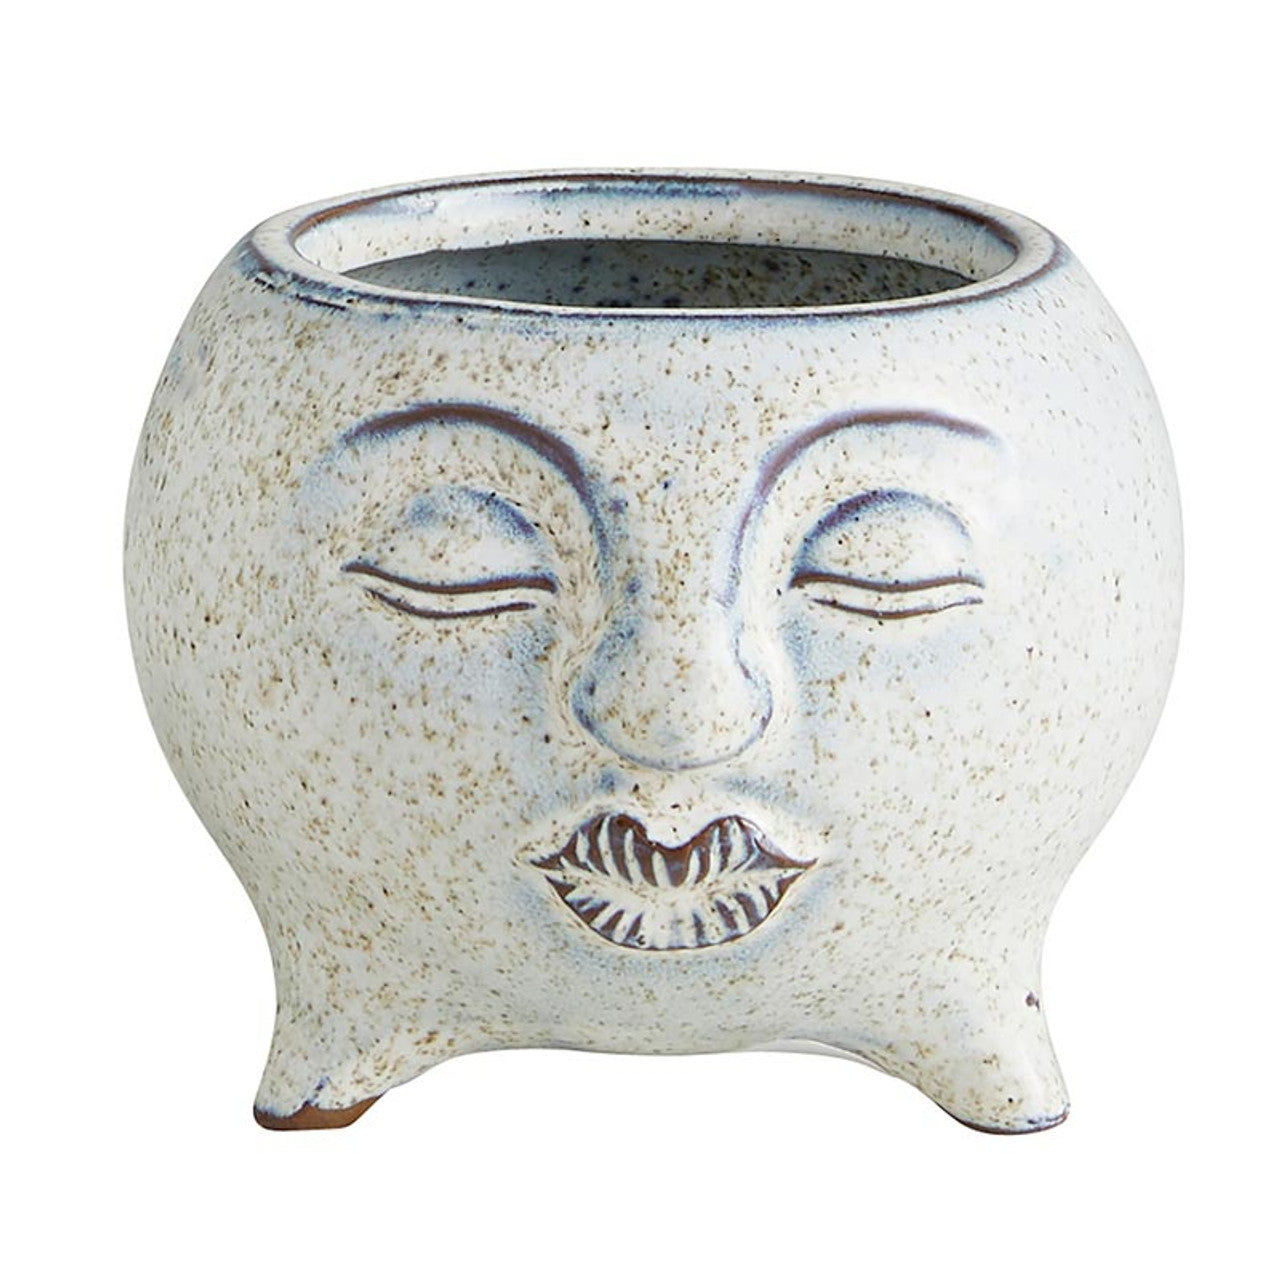 Peaceful Face Planter - Small